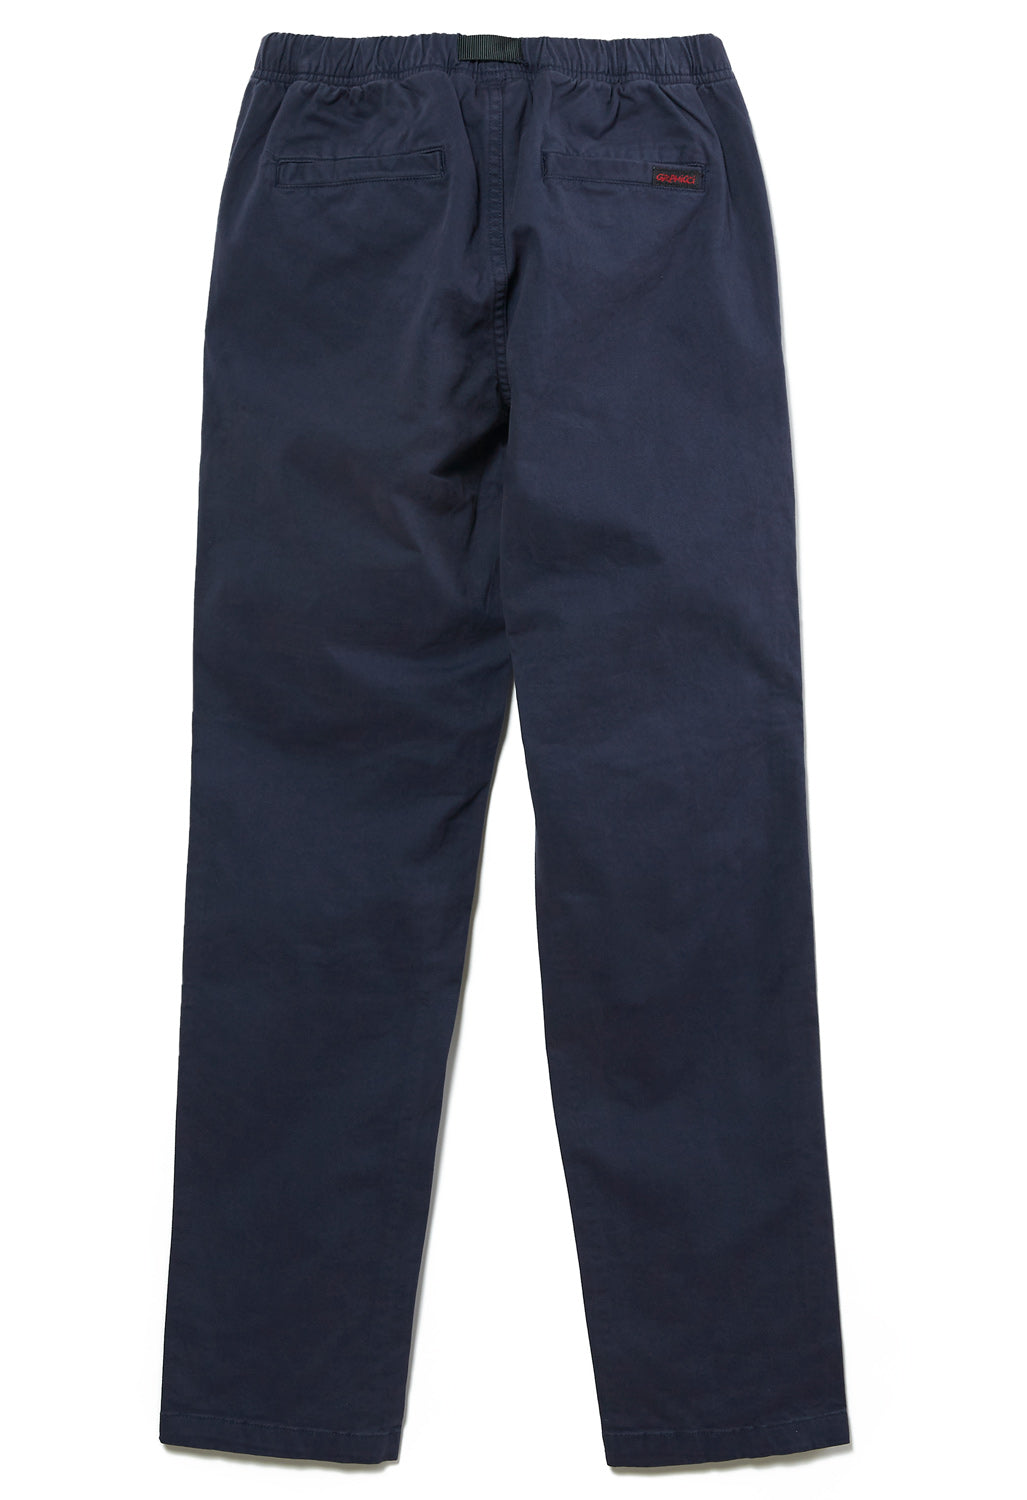 Gramicci Women's Tapered Pants - Double Navy